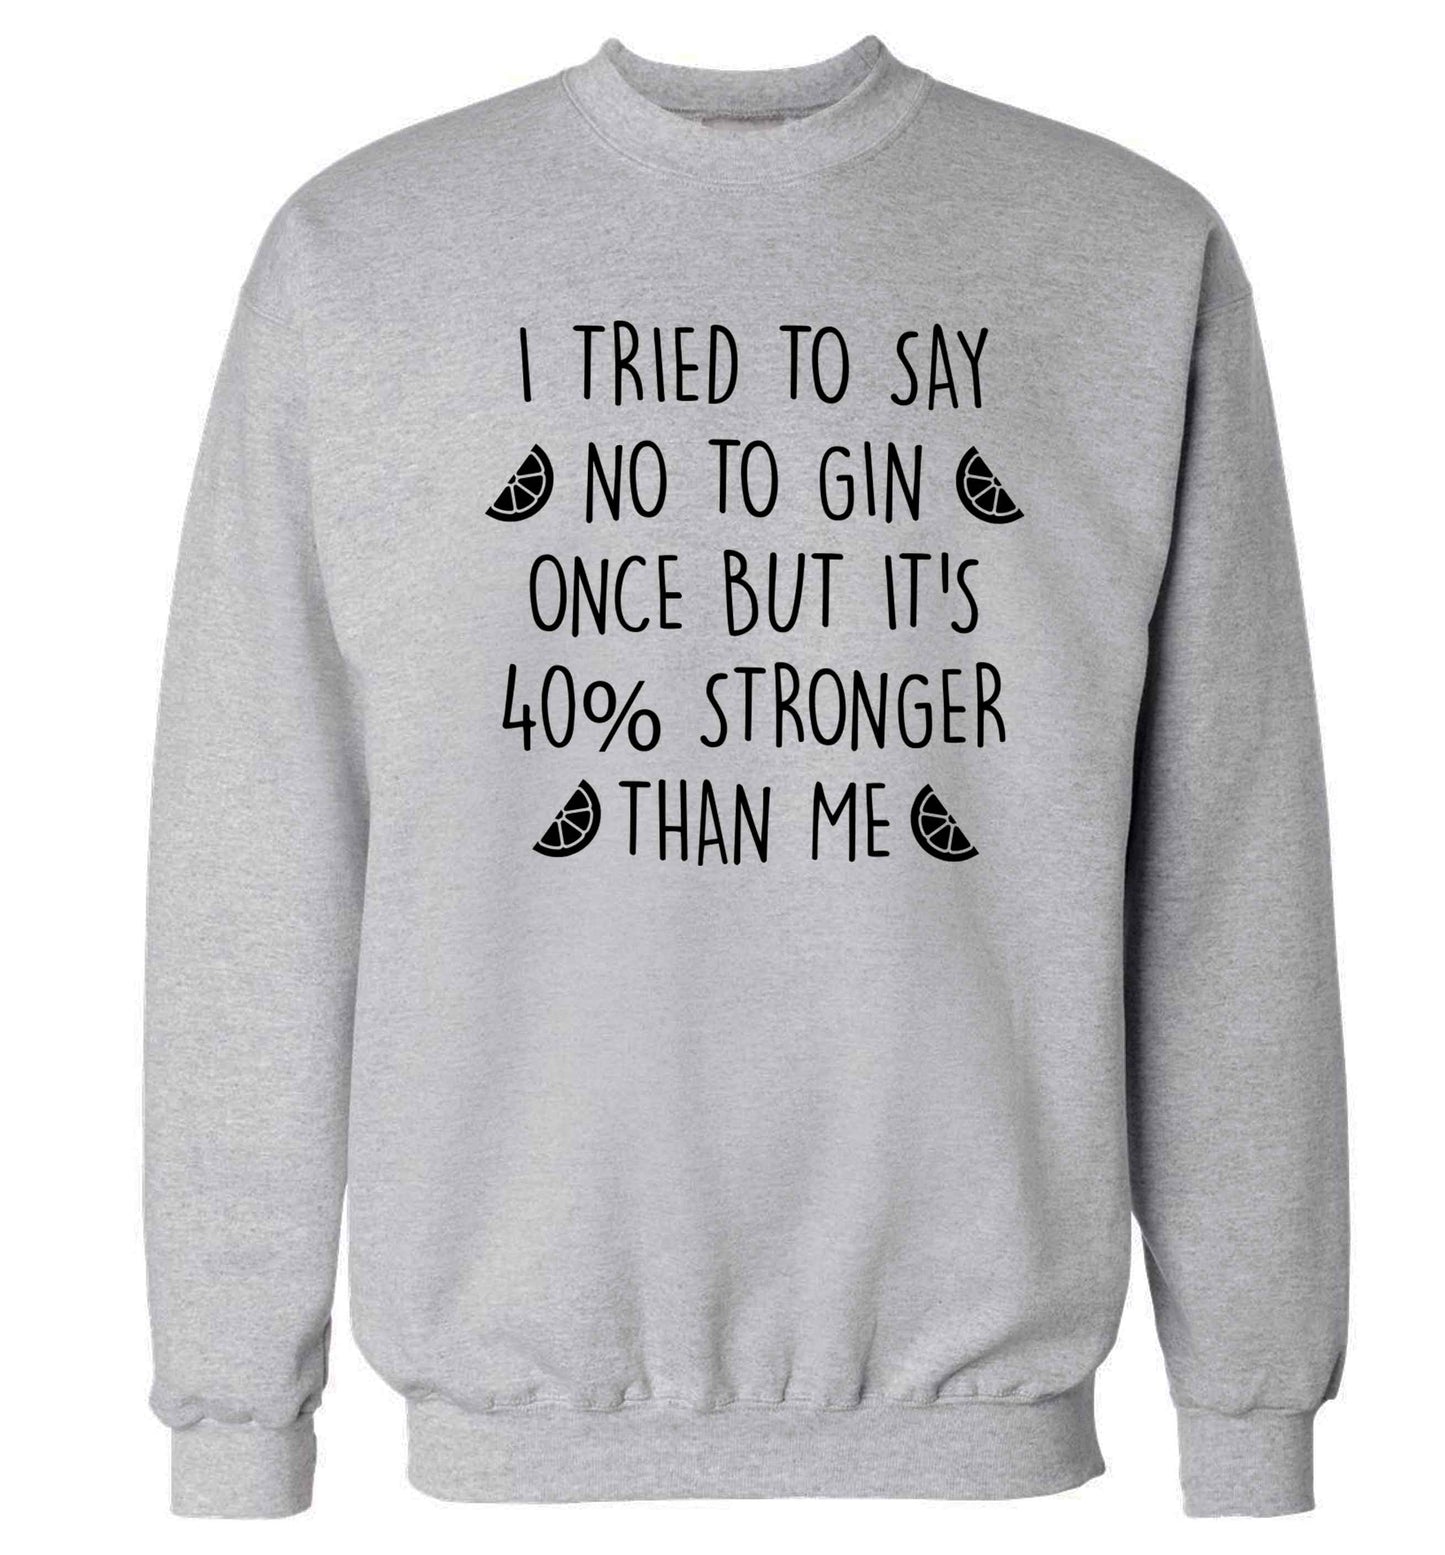 I tried to say no to gin once but it's 40% stronger than me Adult's unisex grey Sweater 2XL